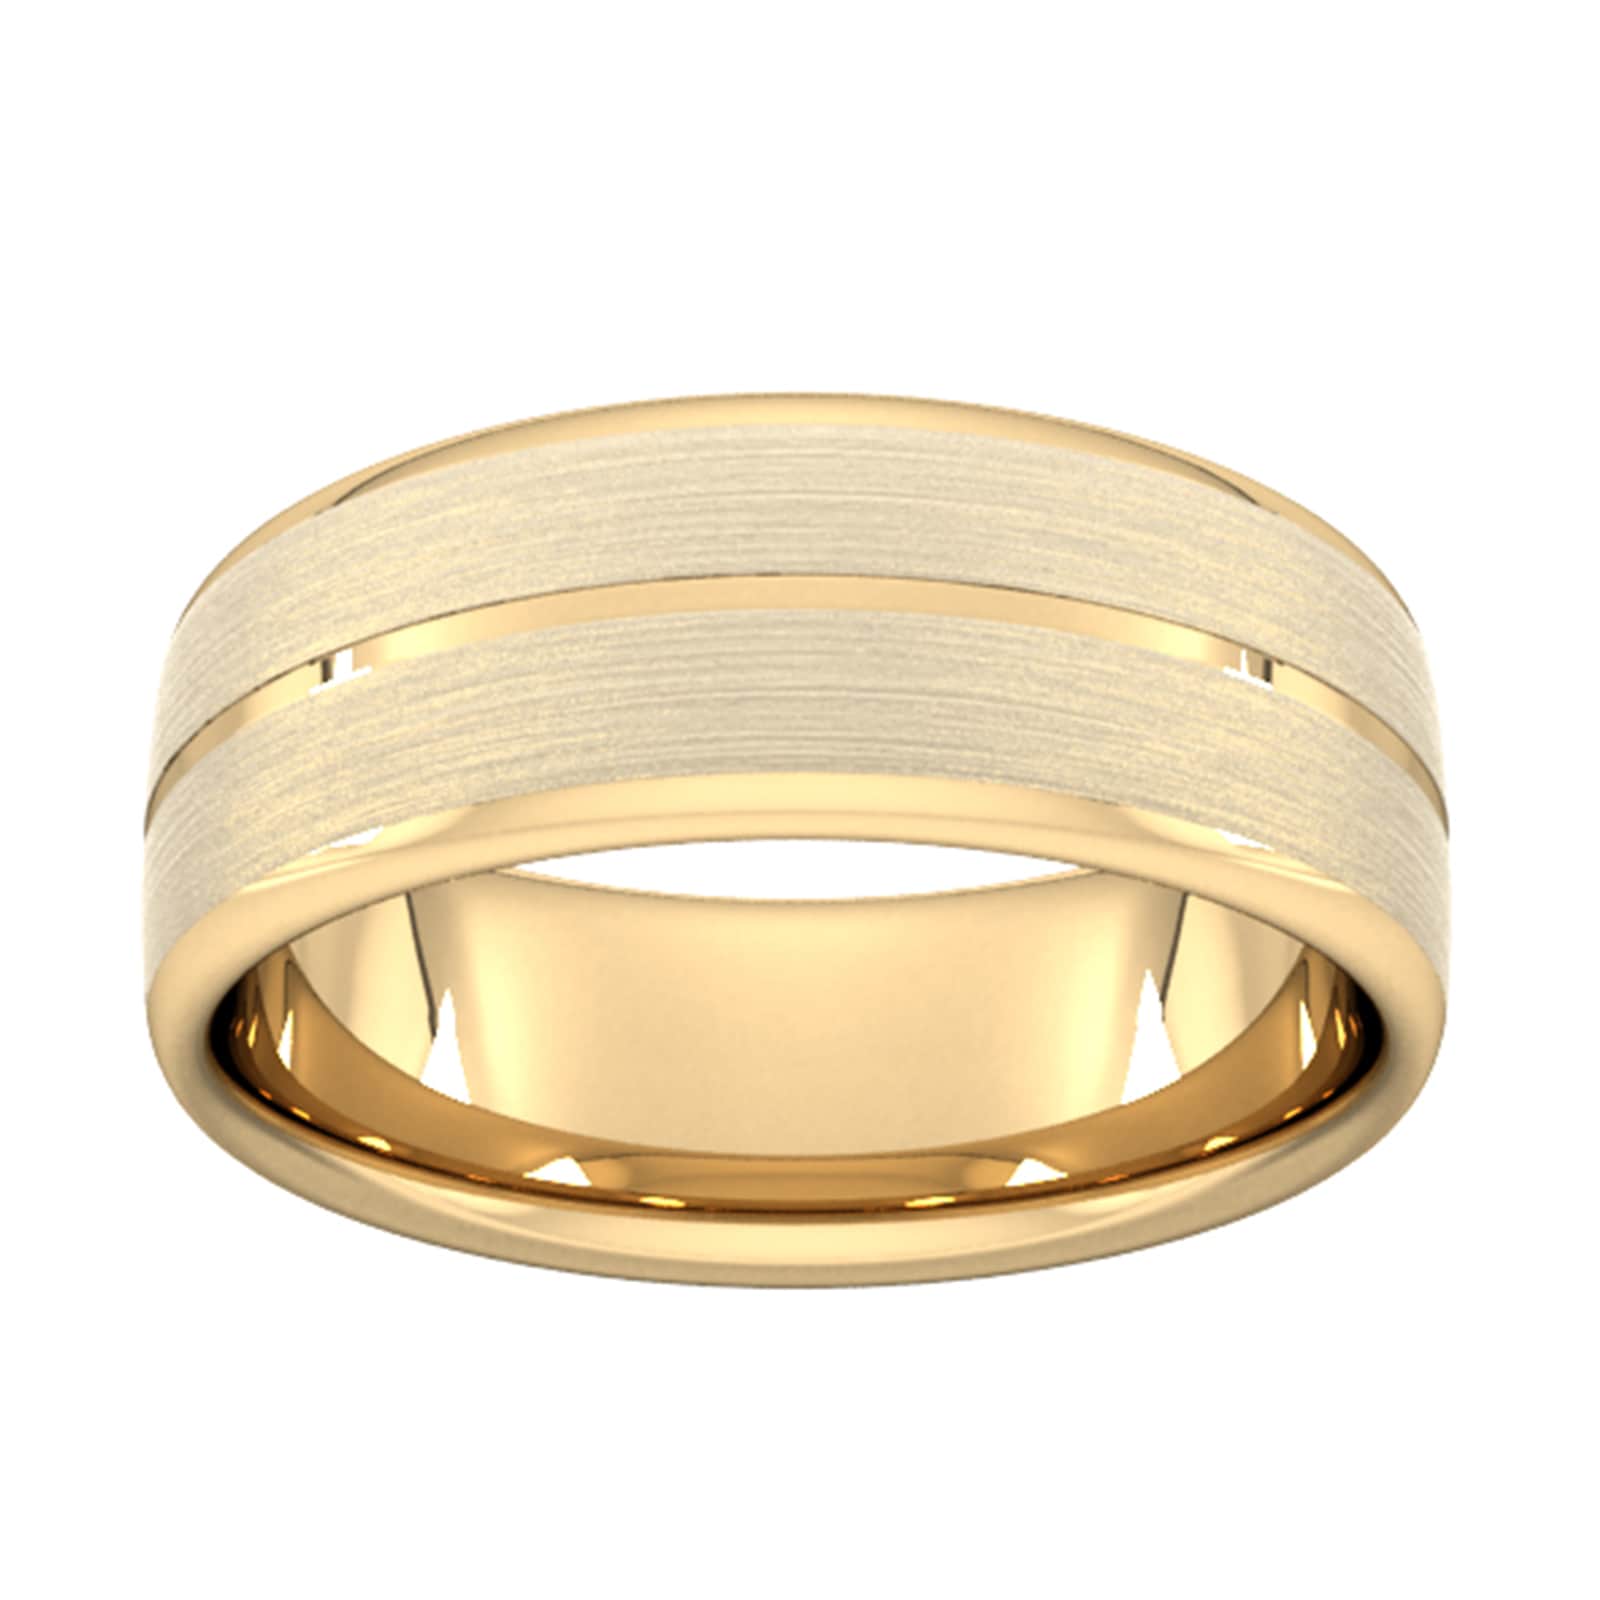 8mm Traditional Court Heavy Centre Groove With Chamfered Edge Wedding Ring In 18 Carat Yellow Gold - Ring Size Q